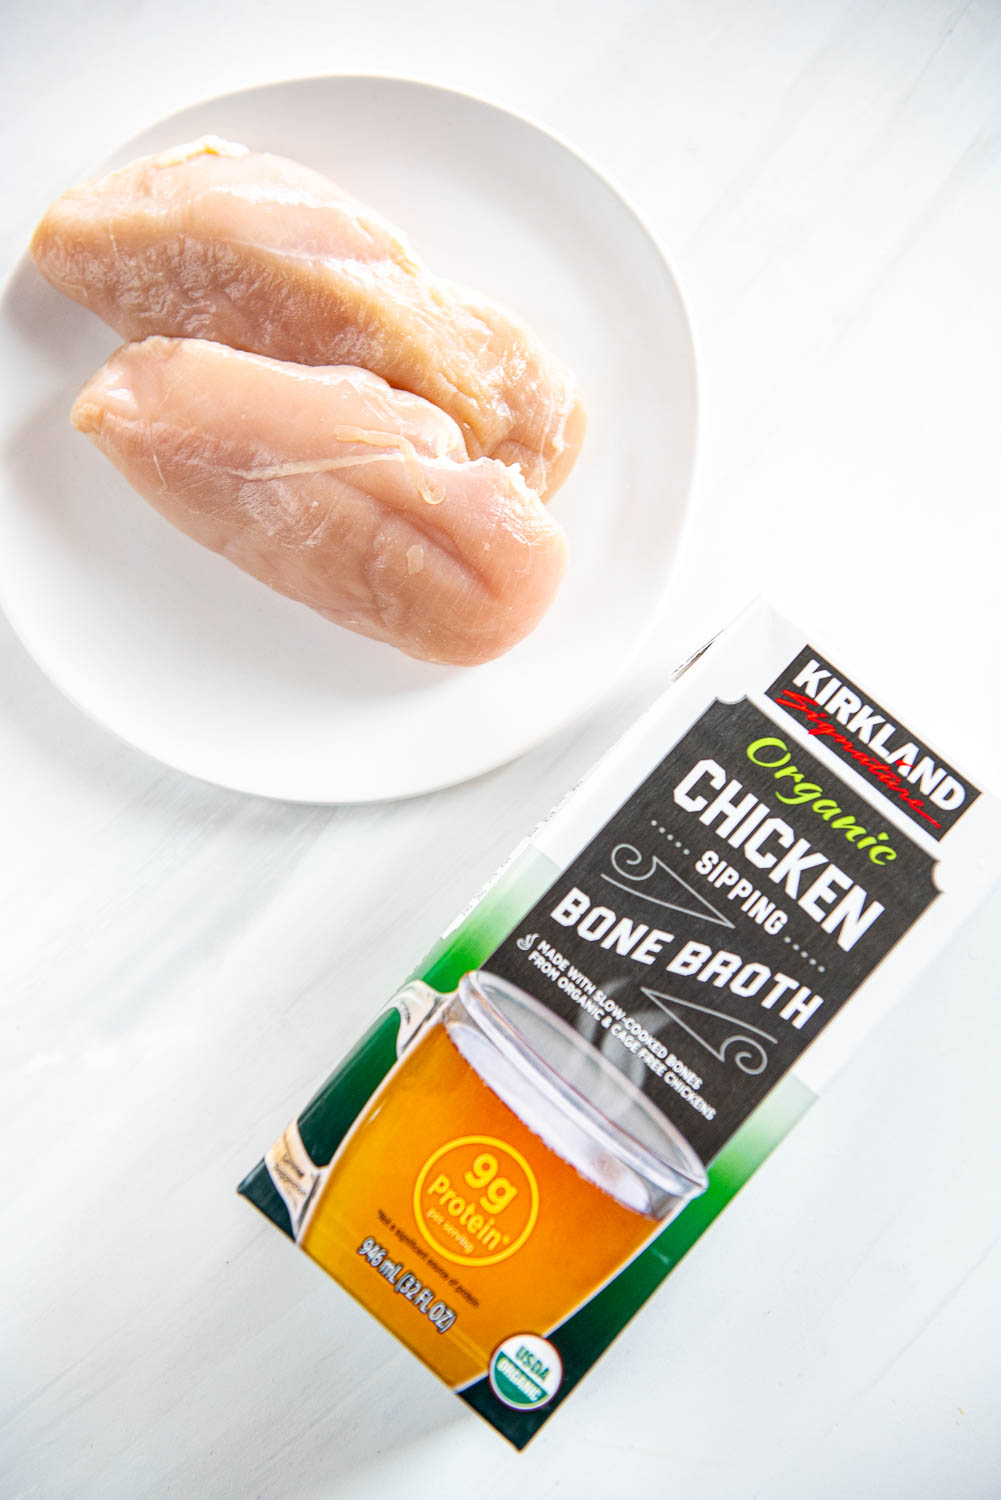 Chicken sipping bone broth 32 fl ox bottle and 2 large chicken breasts